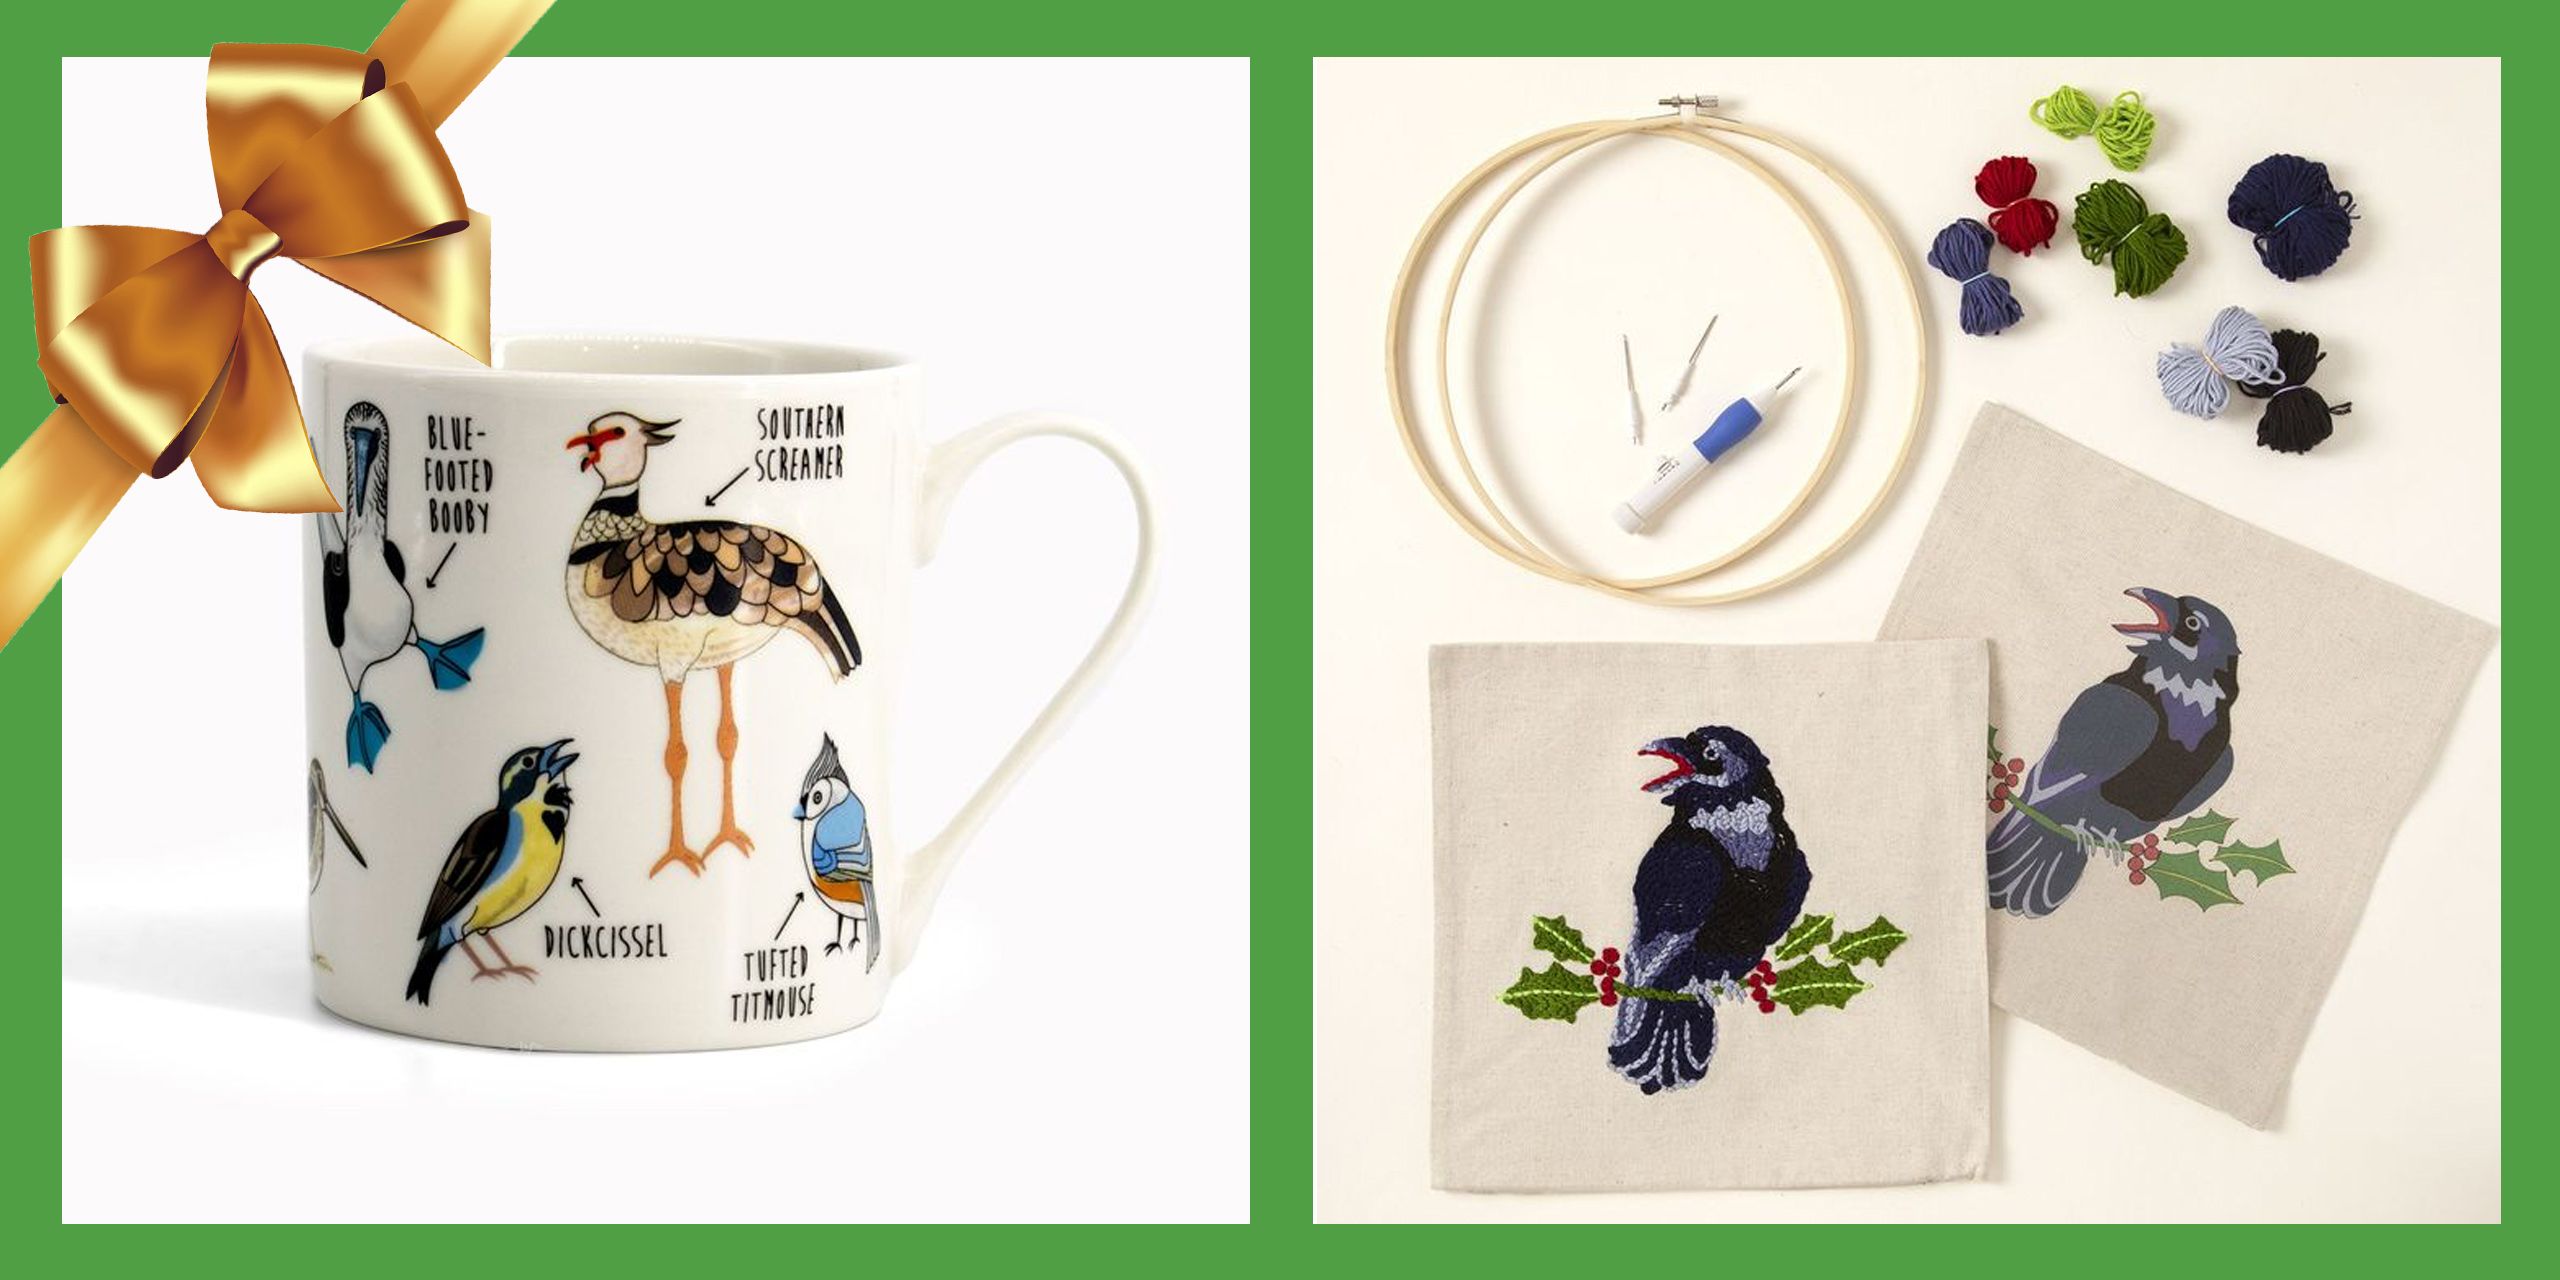 24 Gifts for Bee Lovers That Are Worth Buzzing About - Birds and Blooms